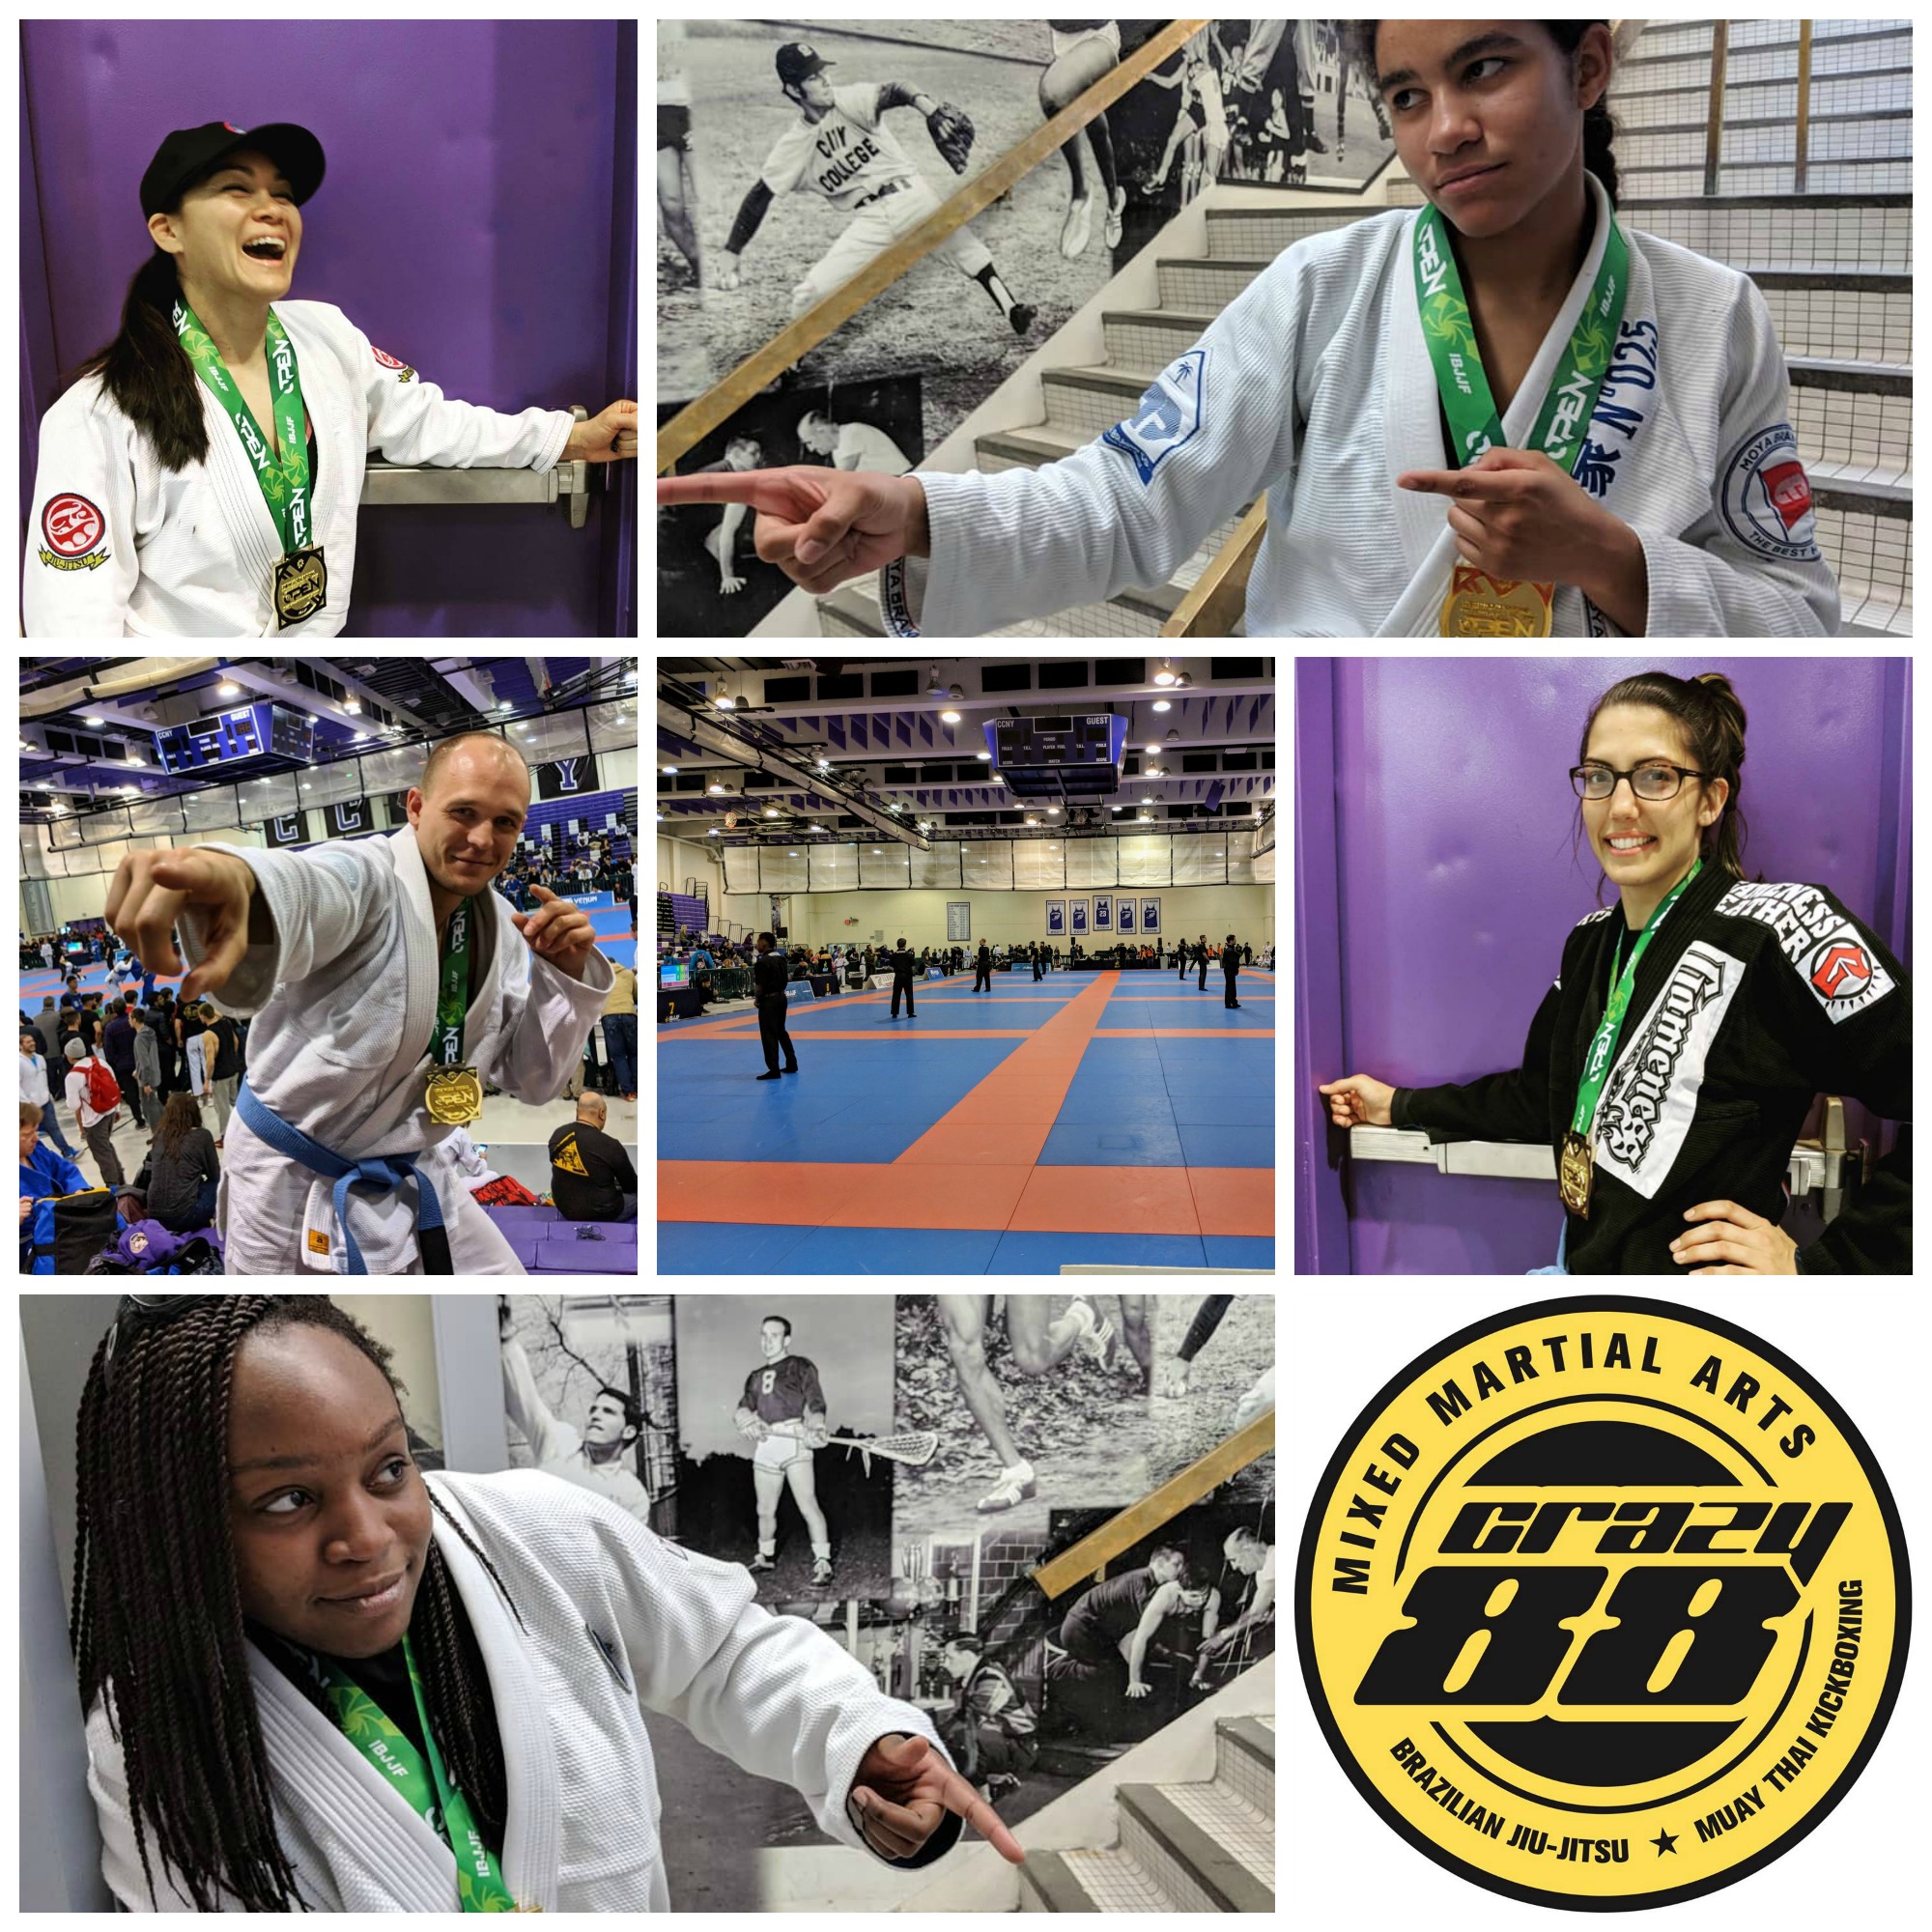 Baltimore BJJ school Crazy 88 wins matches at 2018 New York Spring Open Progress Not Perfection at the IBJJF NY Spring